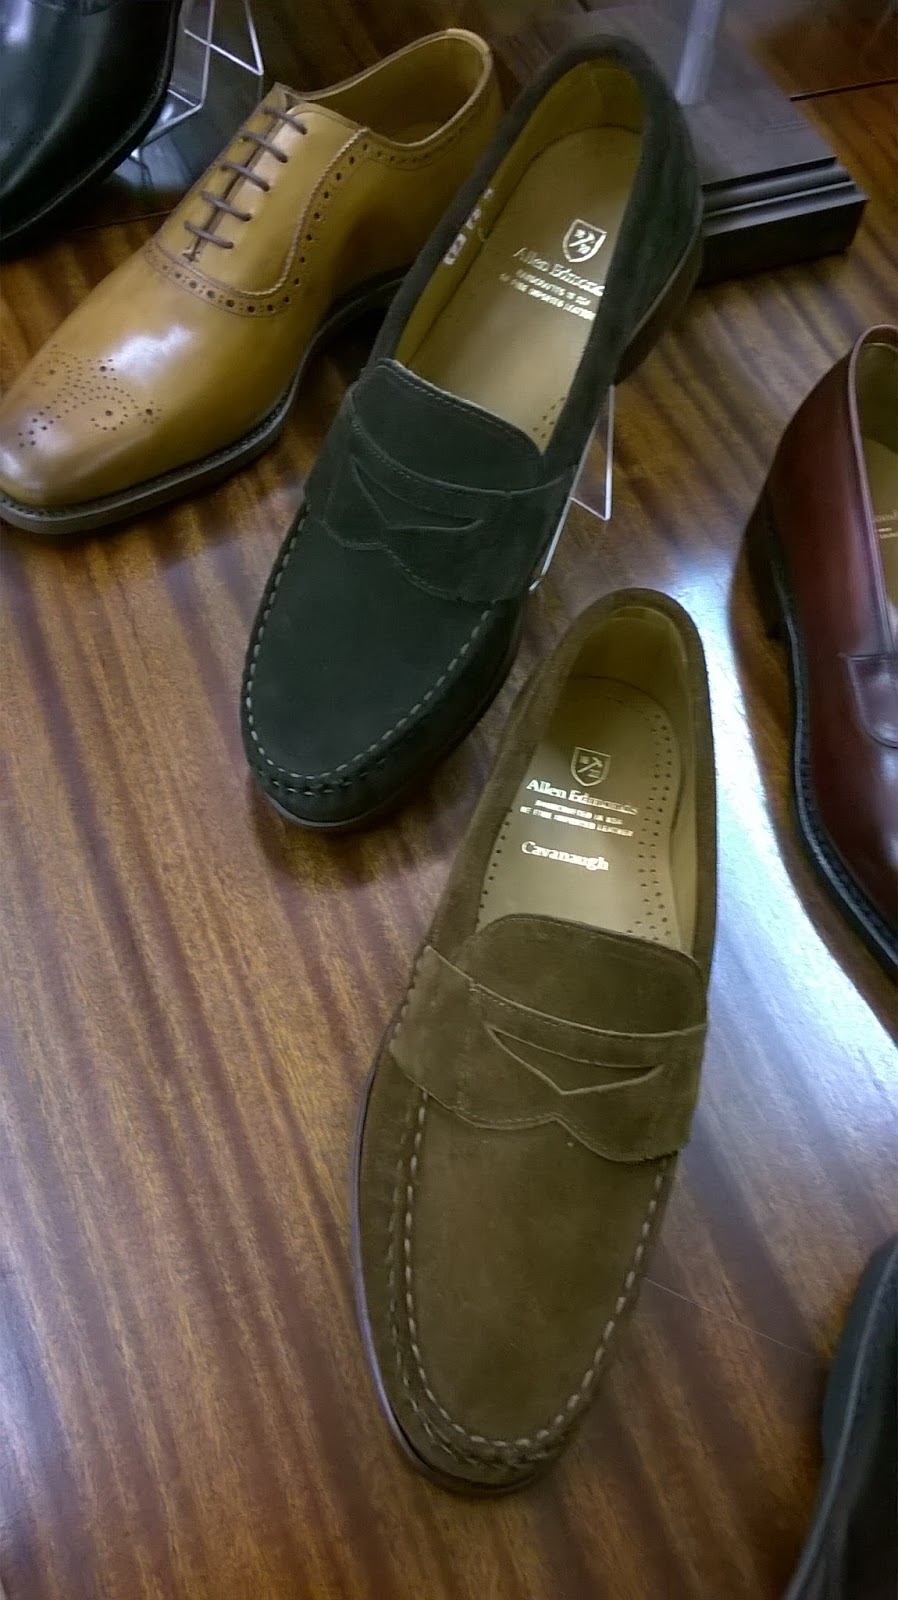 Perfect Gentleman: Brands: The Great American Shoe Company